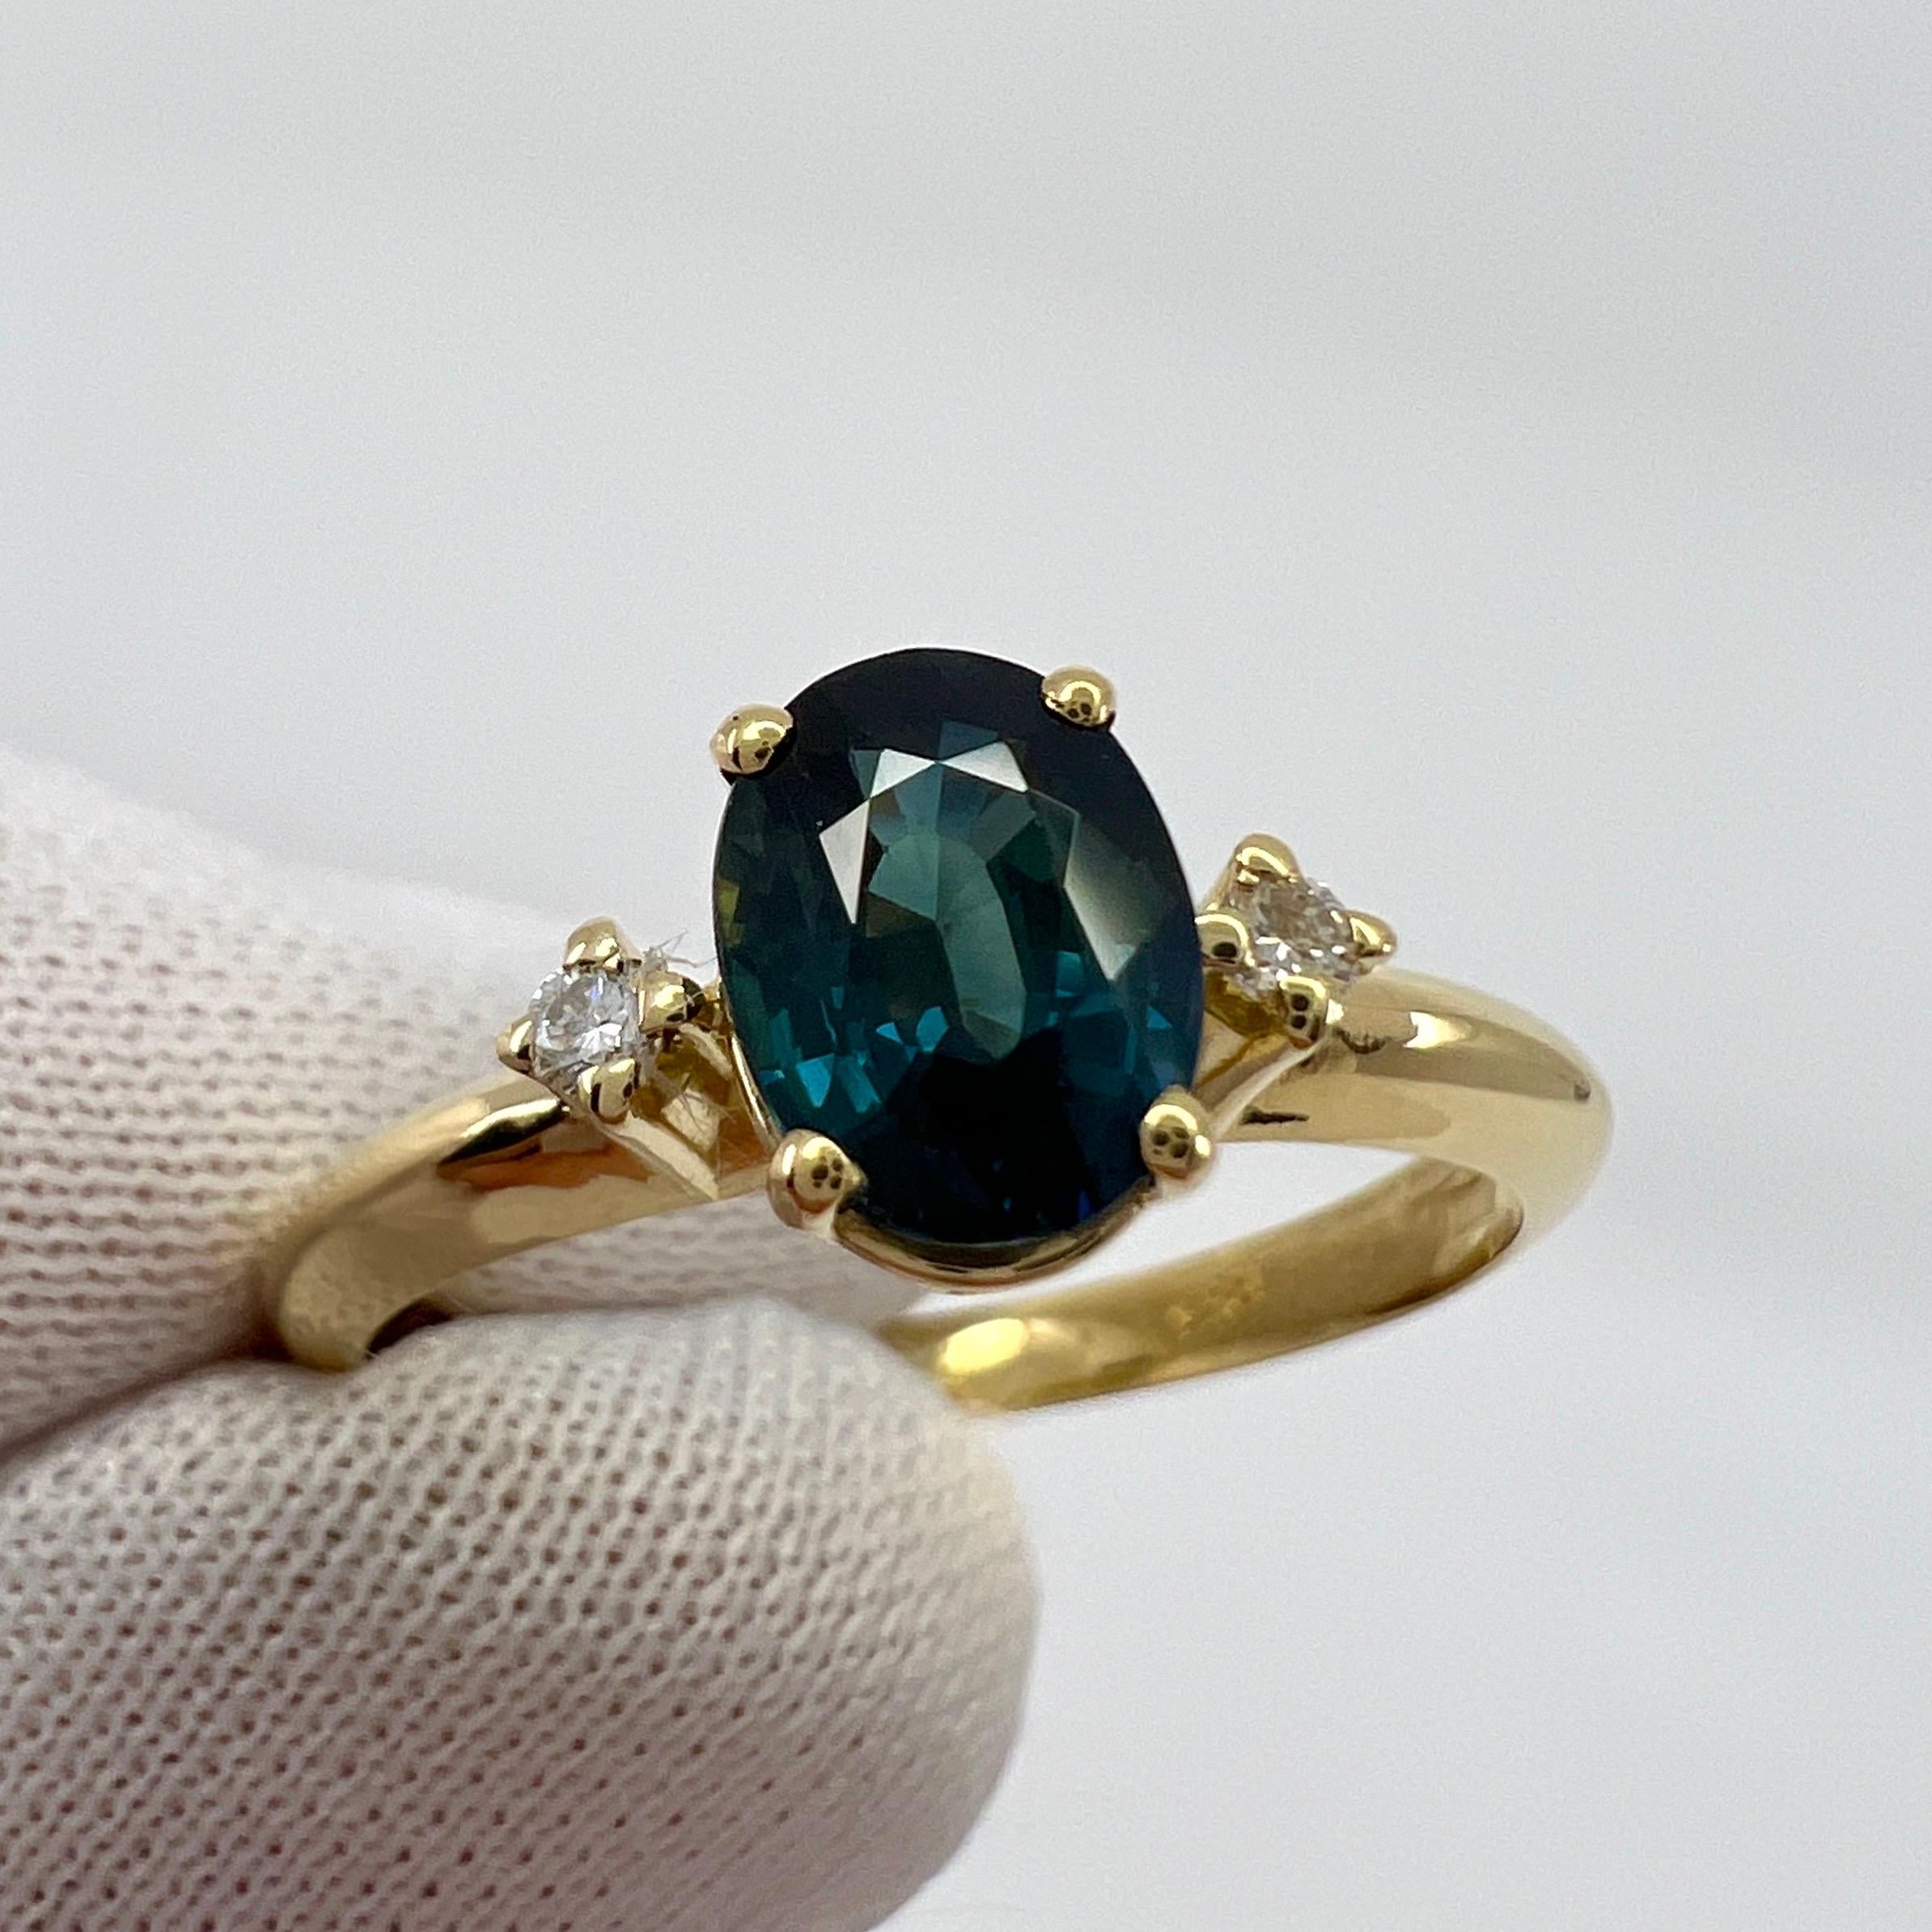 Natural Teal Green Blue Oval Cut Sapphire & Diamond Three Stone 18k Yellow Gold Ring

Fine teal green blue oval cut natural sapphire centre stone. 1.05 carat measuring just under 6.8x5mm. Excellent oval cut and very good clarity.
Accented by x2